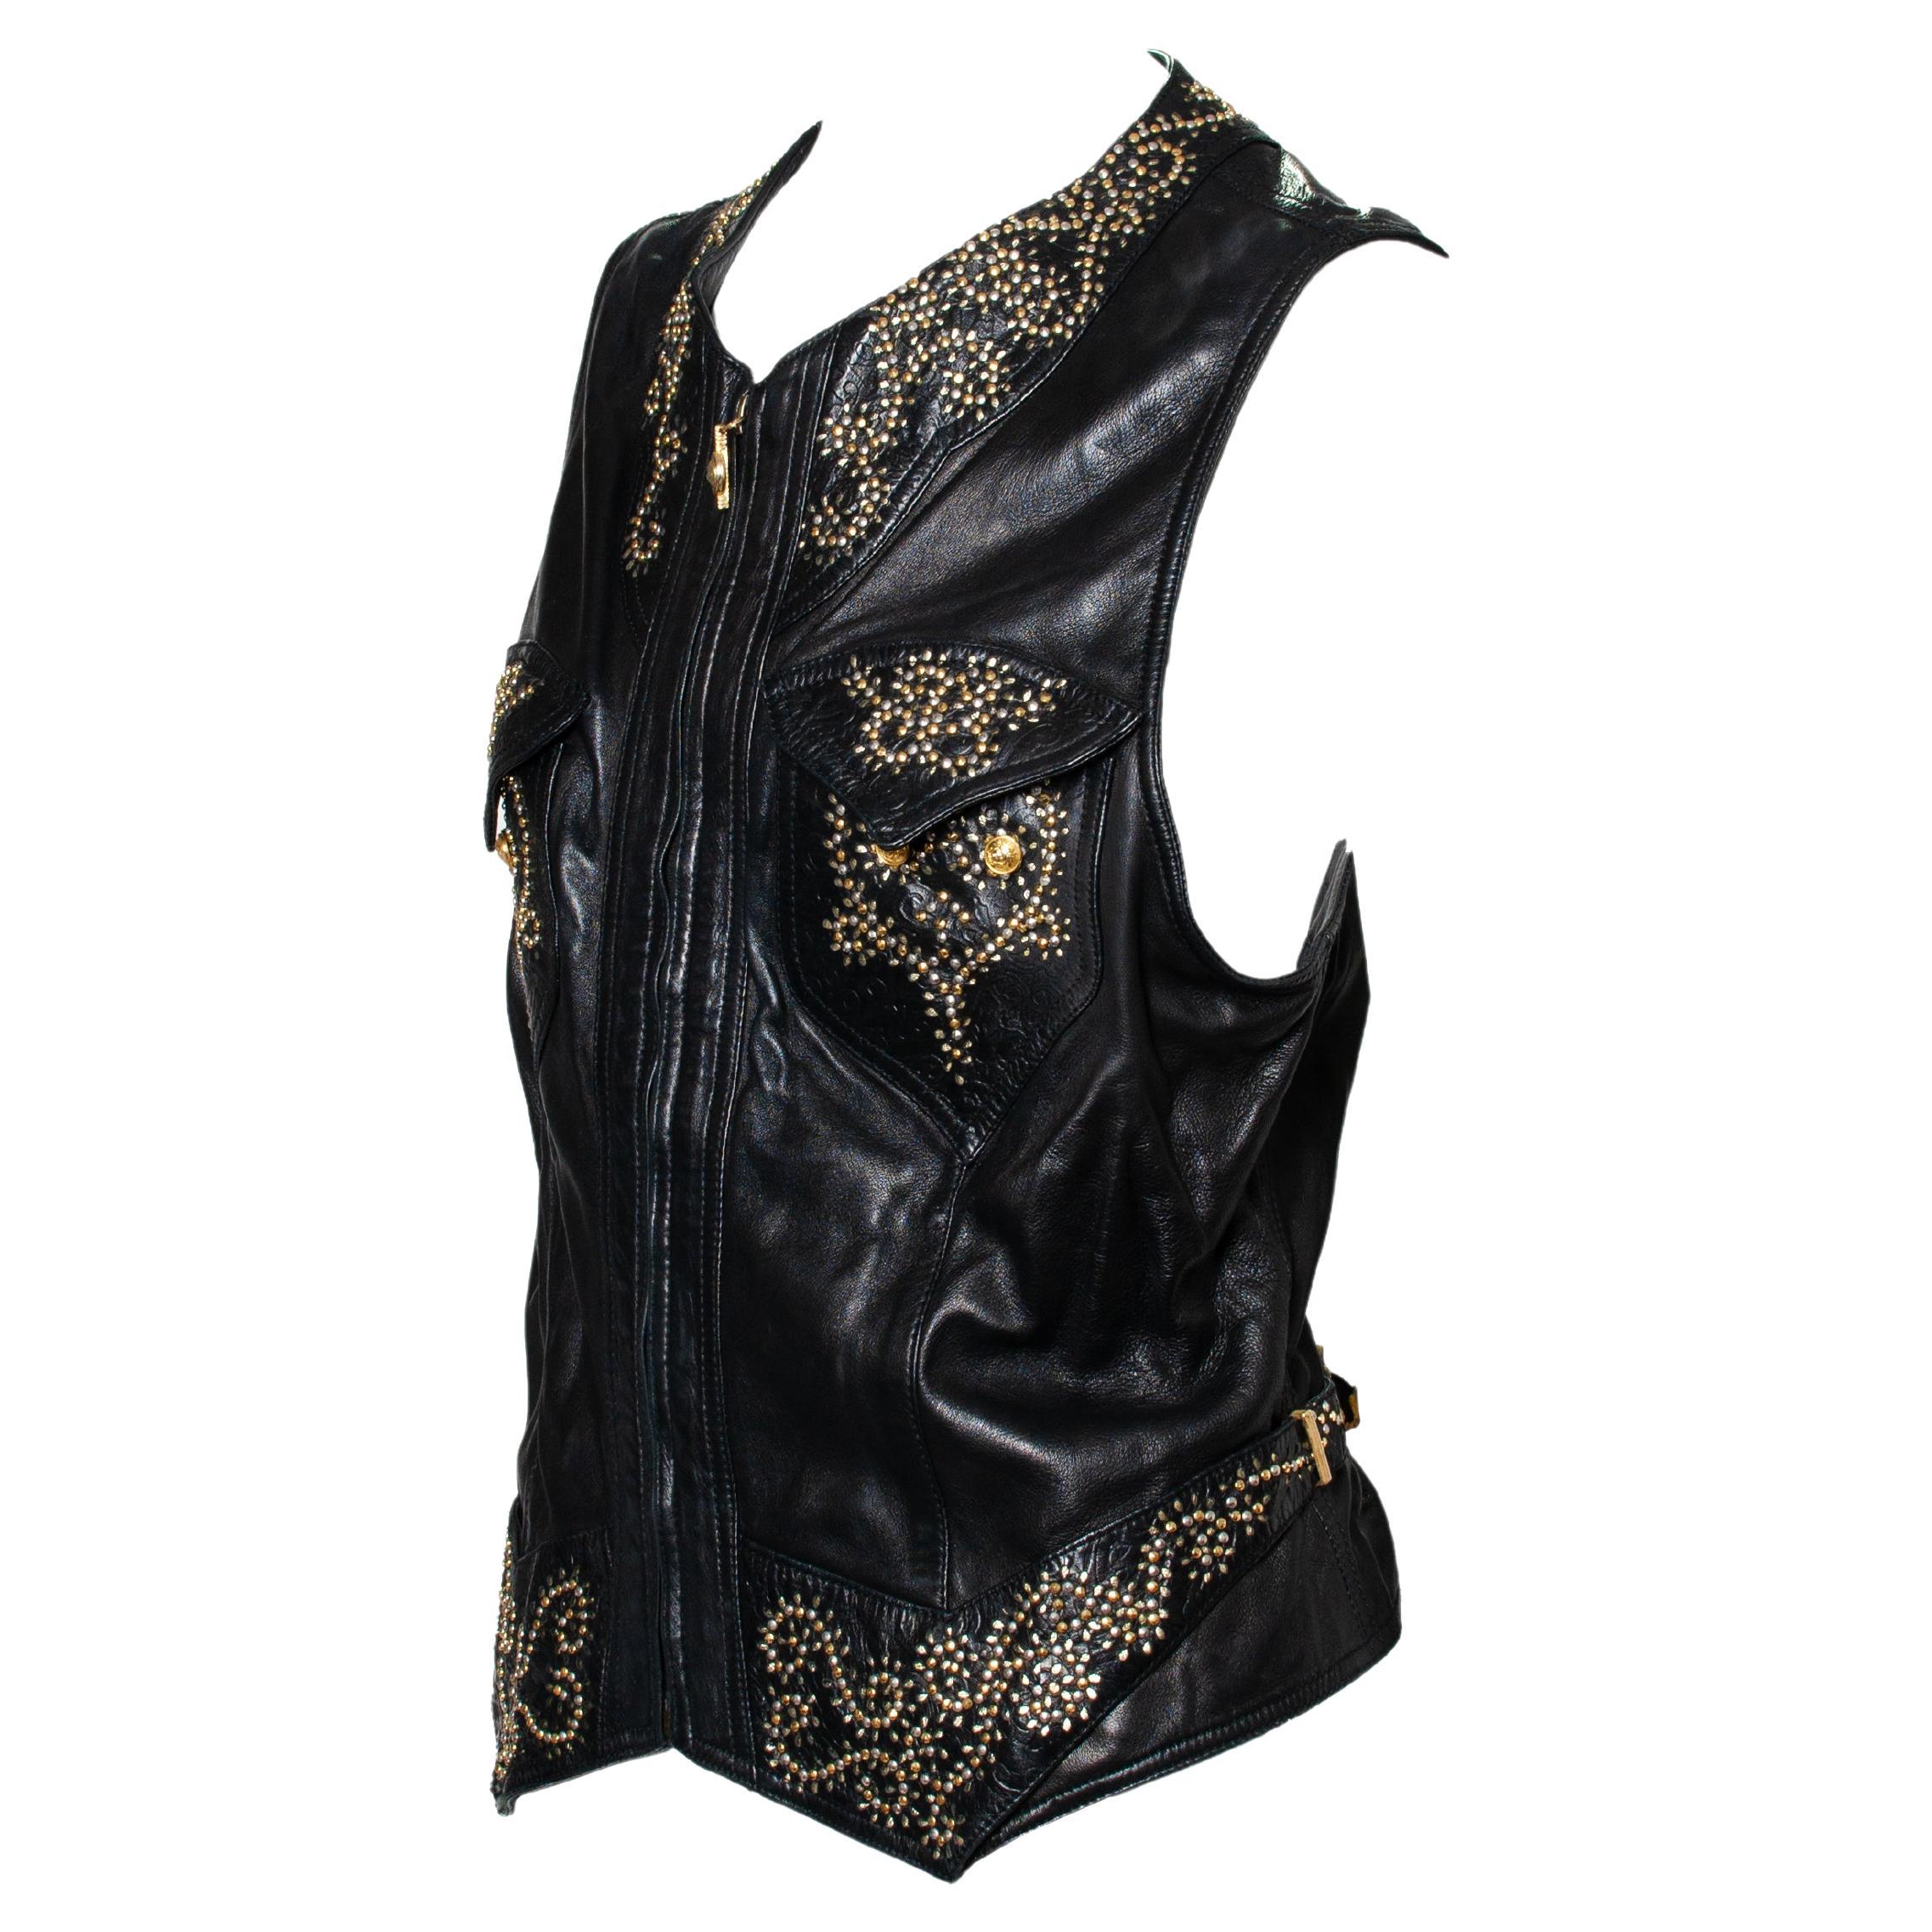 Black F/W 1992 Gianni Versace 'Miss S&M' Studded Leather Vest Medusa Accents For Sale